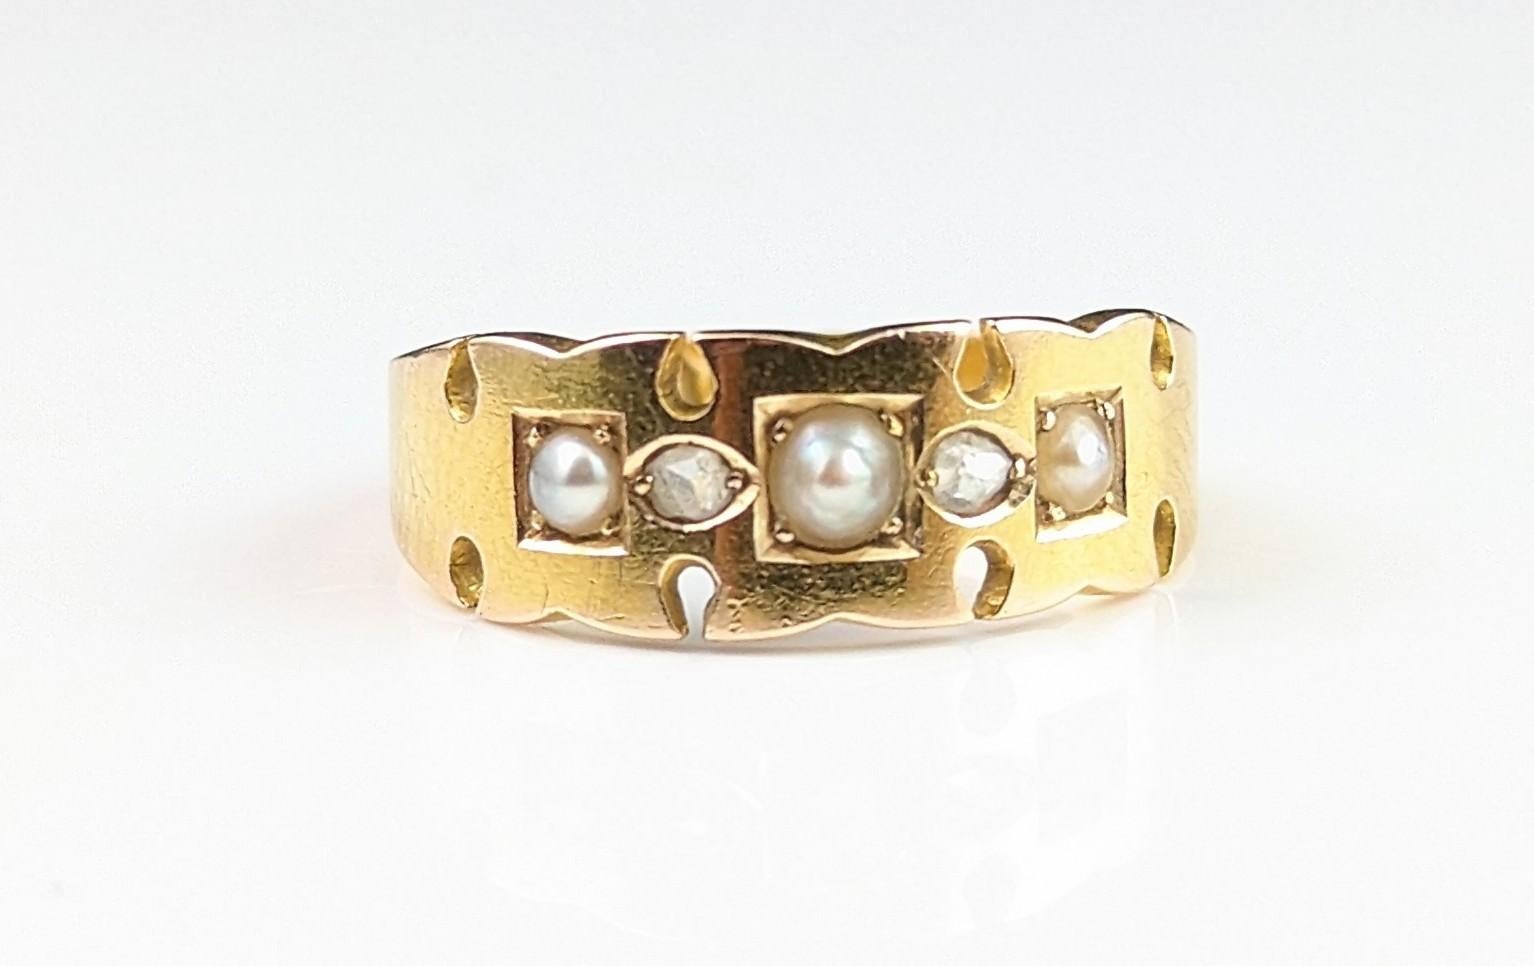 Antique Victorian Rose Cut Diamond and Pearl Ring, 15 Karat Yellow Gold 7